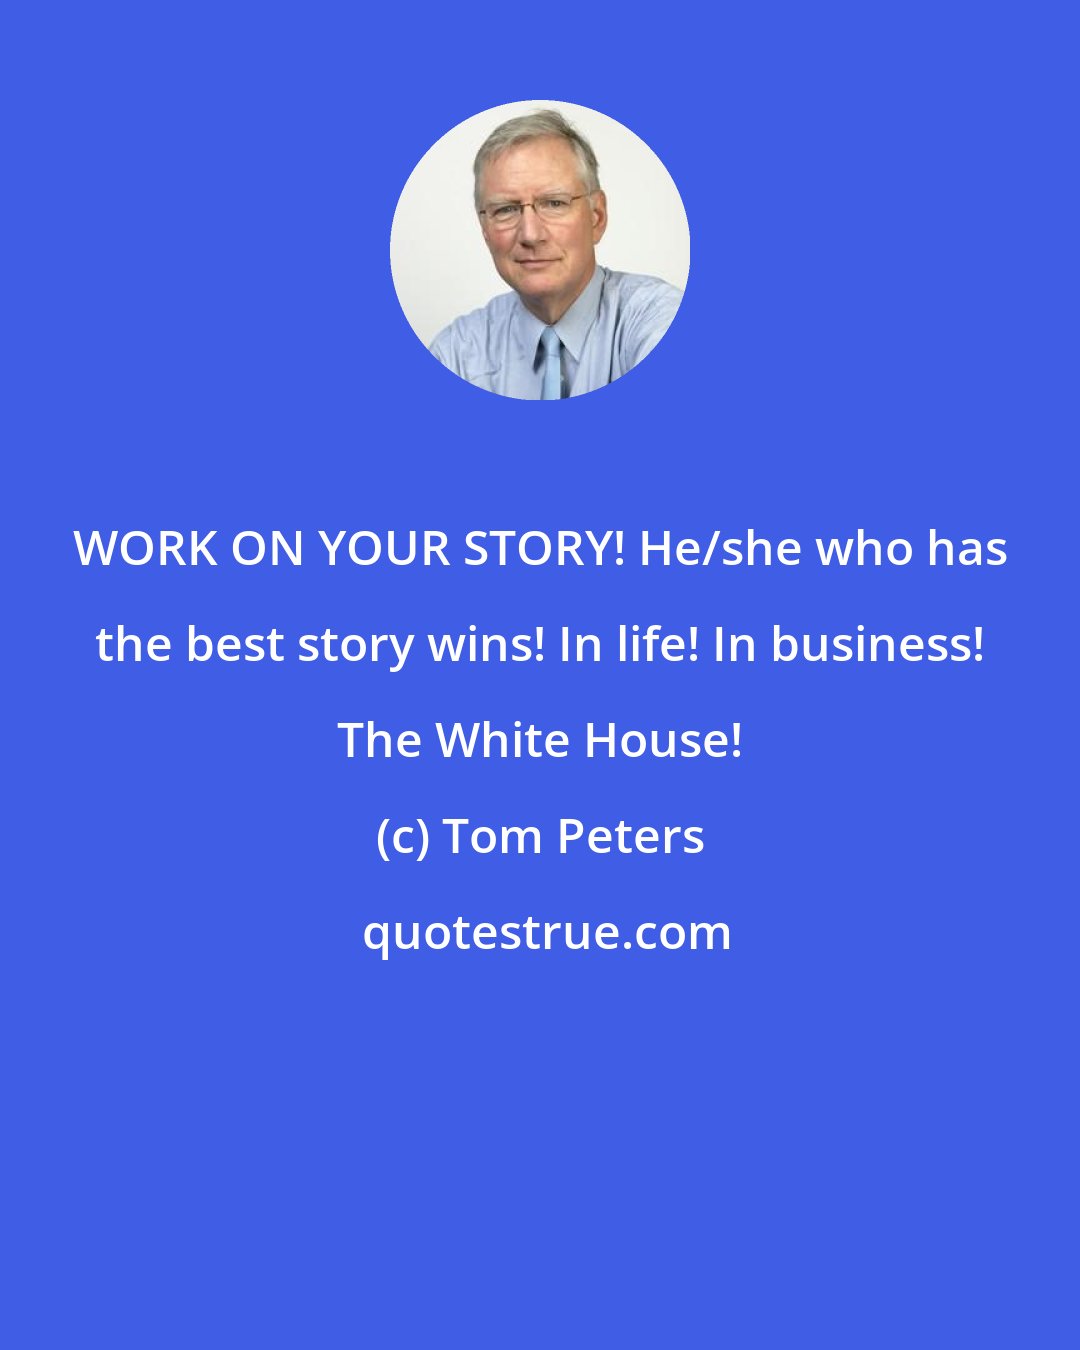 Tom Peters: WORK ON YOUR STORY! He/she who has the best story wins! In life! In business! The White House!